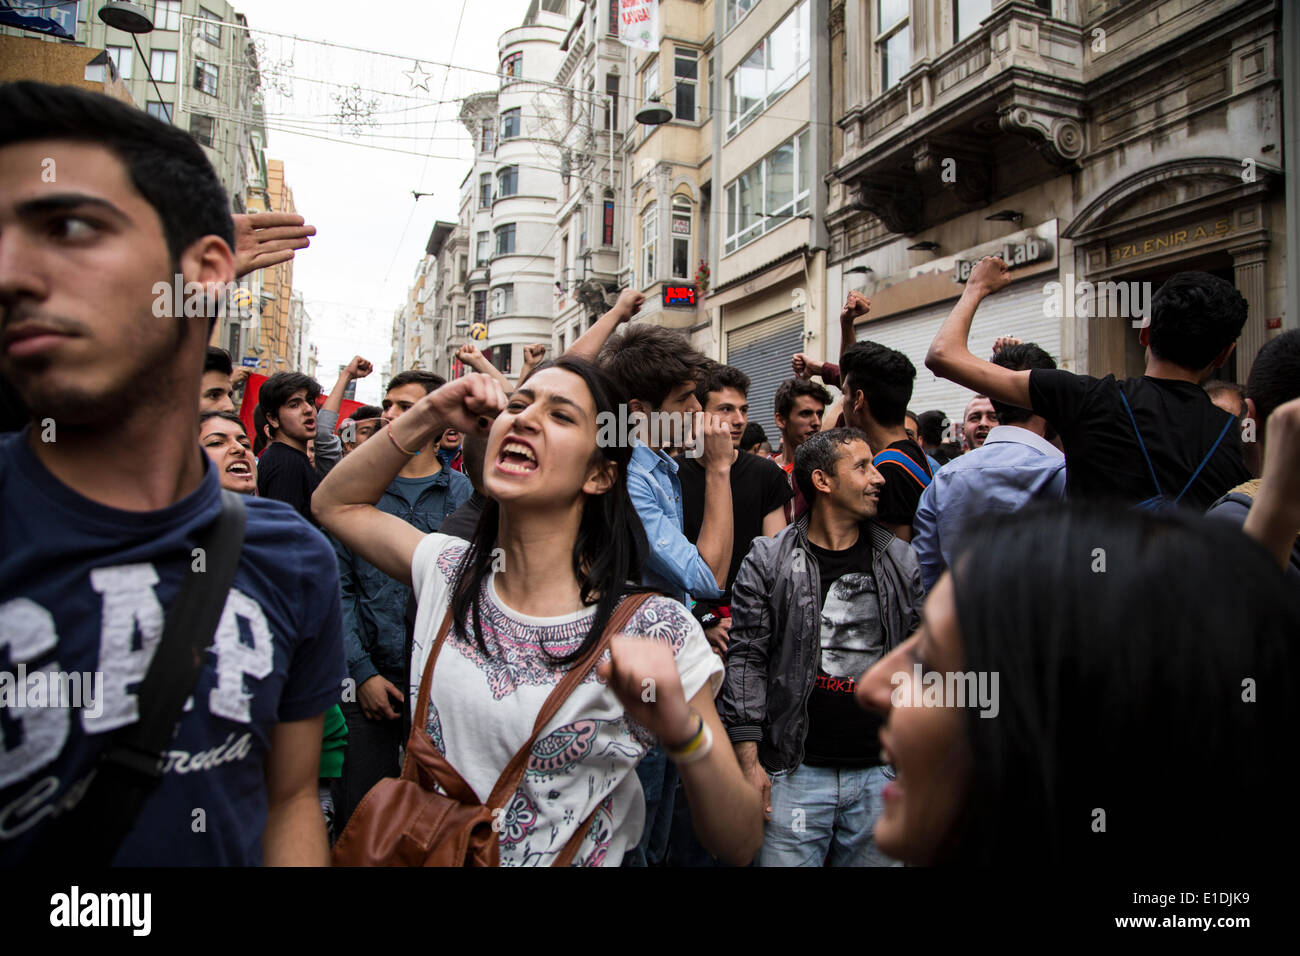 Istanbul, Turkey. 31st May, 2014. On the anniversary of Gezi Park protests of Summer 2013, thousands gather in Istiklal Caddesi, despite the governor, on strict orders from MOI, cancel ferry and metro services, and despite around 25000 riot police officers and heavy riot vehicles put on special duty. Entrance to Taksim Square is blocked by riot police as of 14:30. Protesters keep on gathering on Istiklal Caddesi demanding entry into the park to commemorate those that died by police violence during the past year. Credit:  Bikem Ekberzade/Alamy Live News Stock Photo